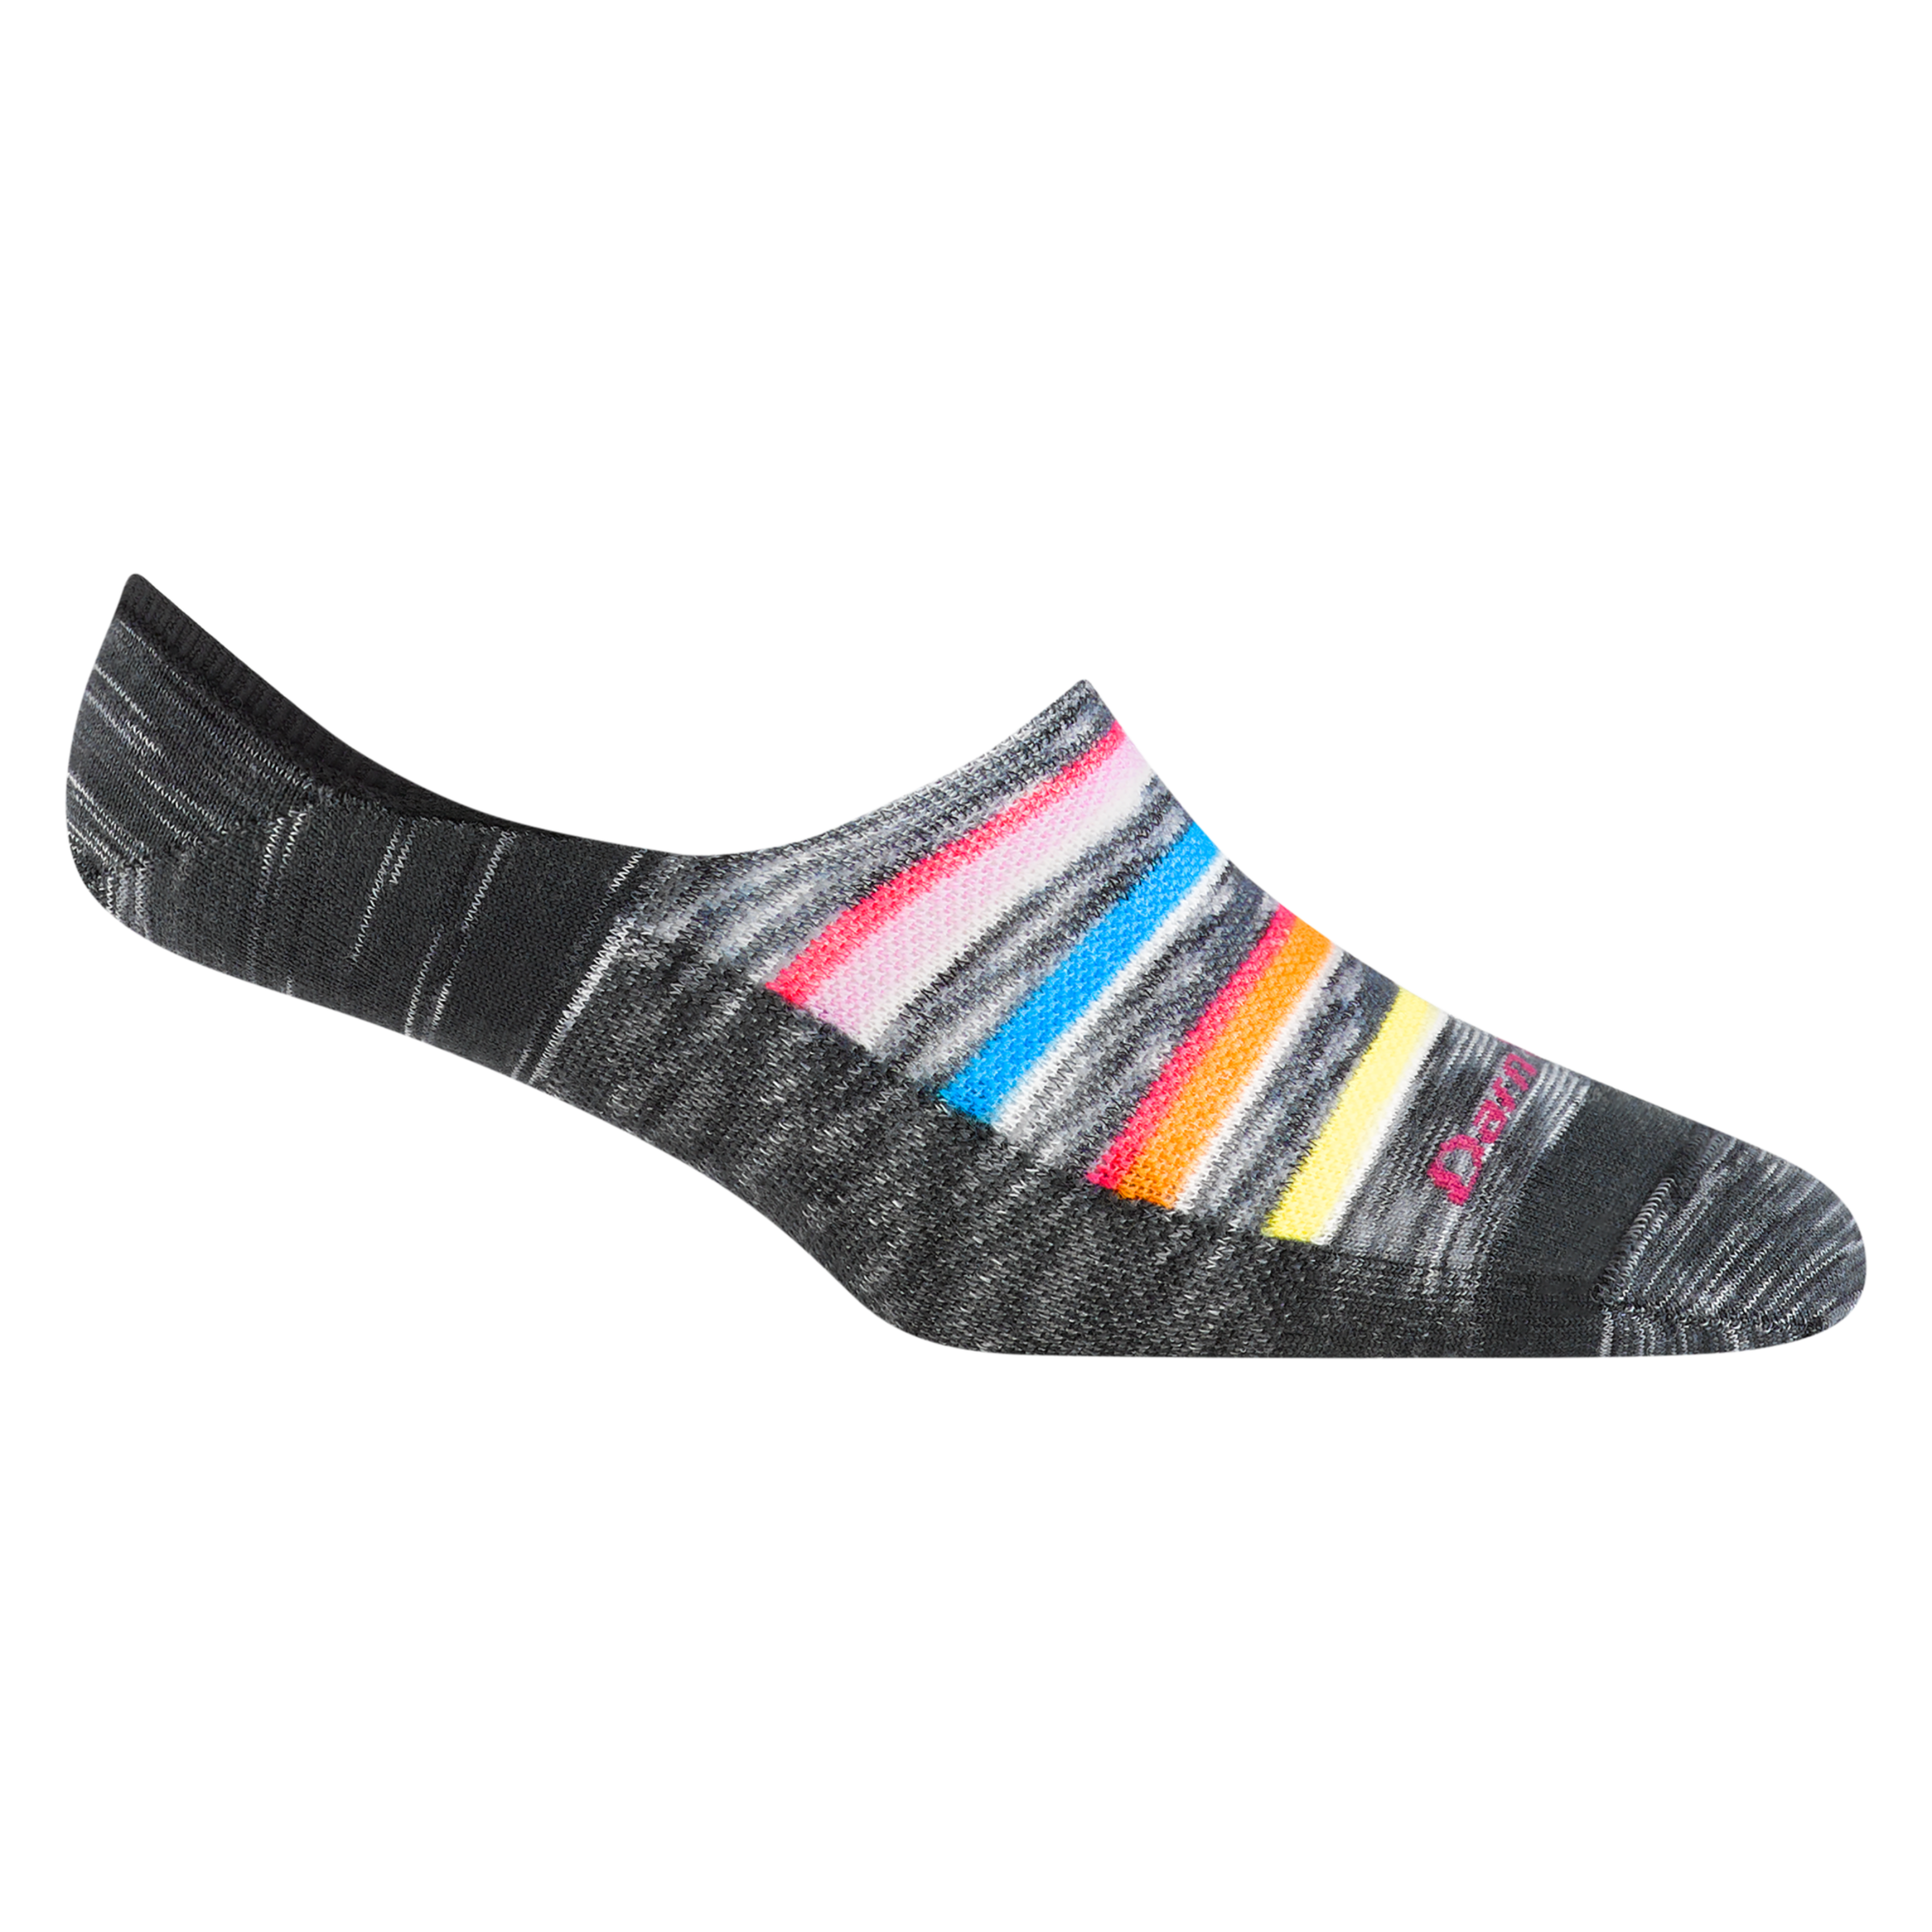 6101 women's nova no show hidden lifestyle sock in space gray with pink, orange, blue and yellow forefoot striping